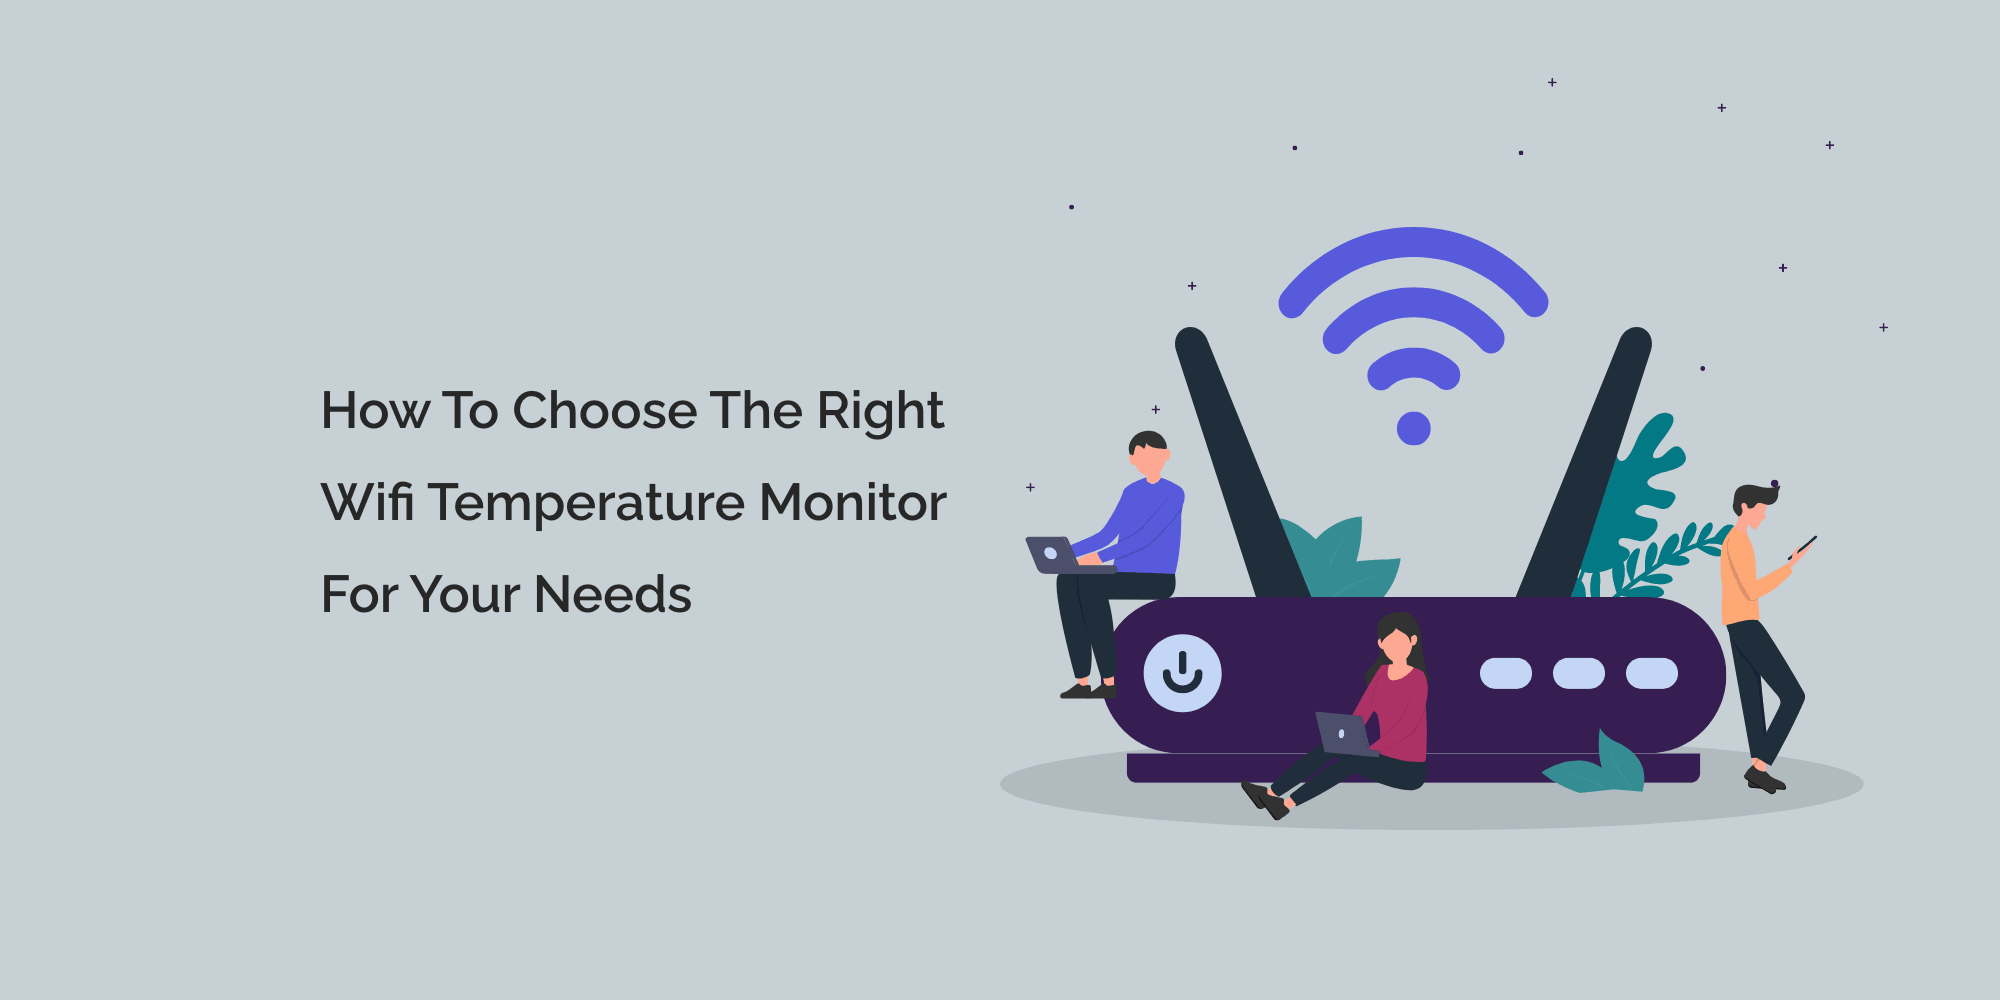 How to Choose the Right WiFi Temperature Monitor for Your Needs